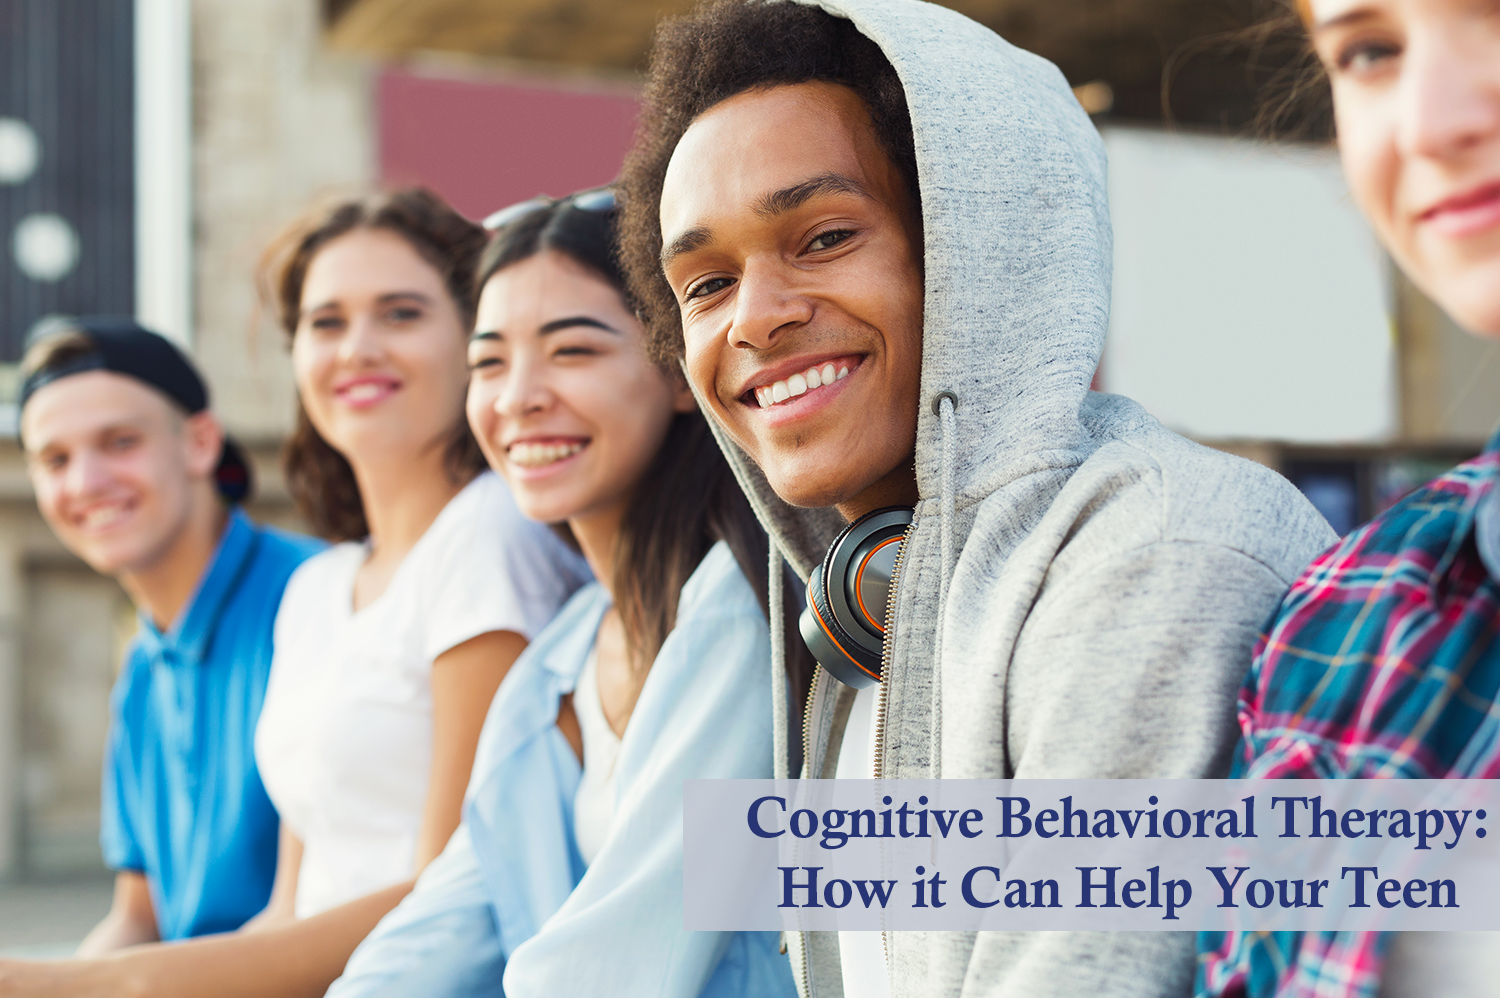 Teens sitting in a row, smiling at the camera after their cognitive behavioral therapy session.